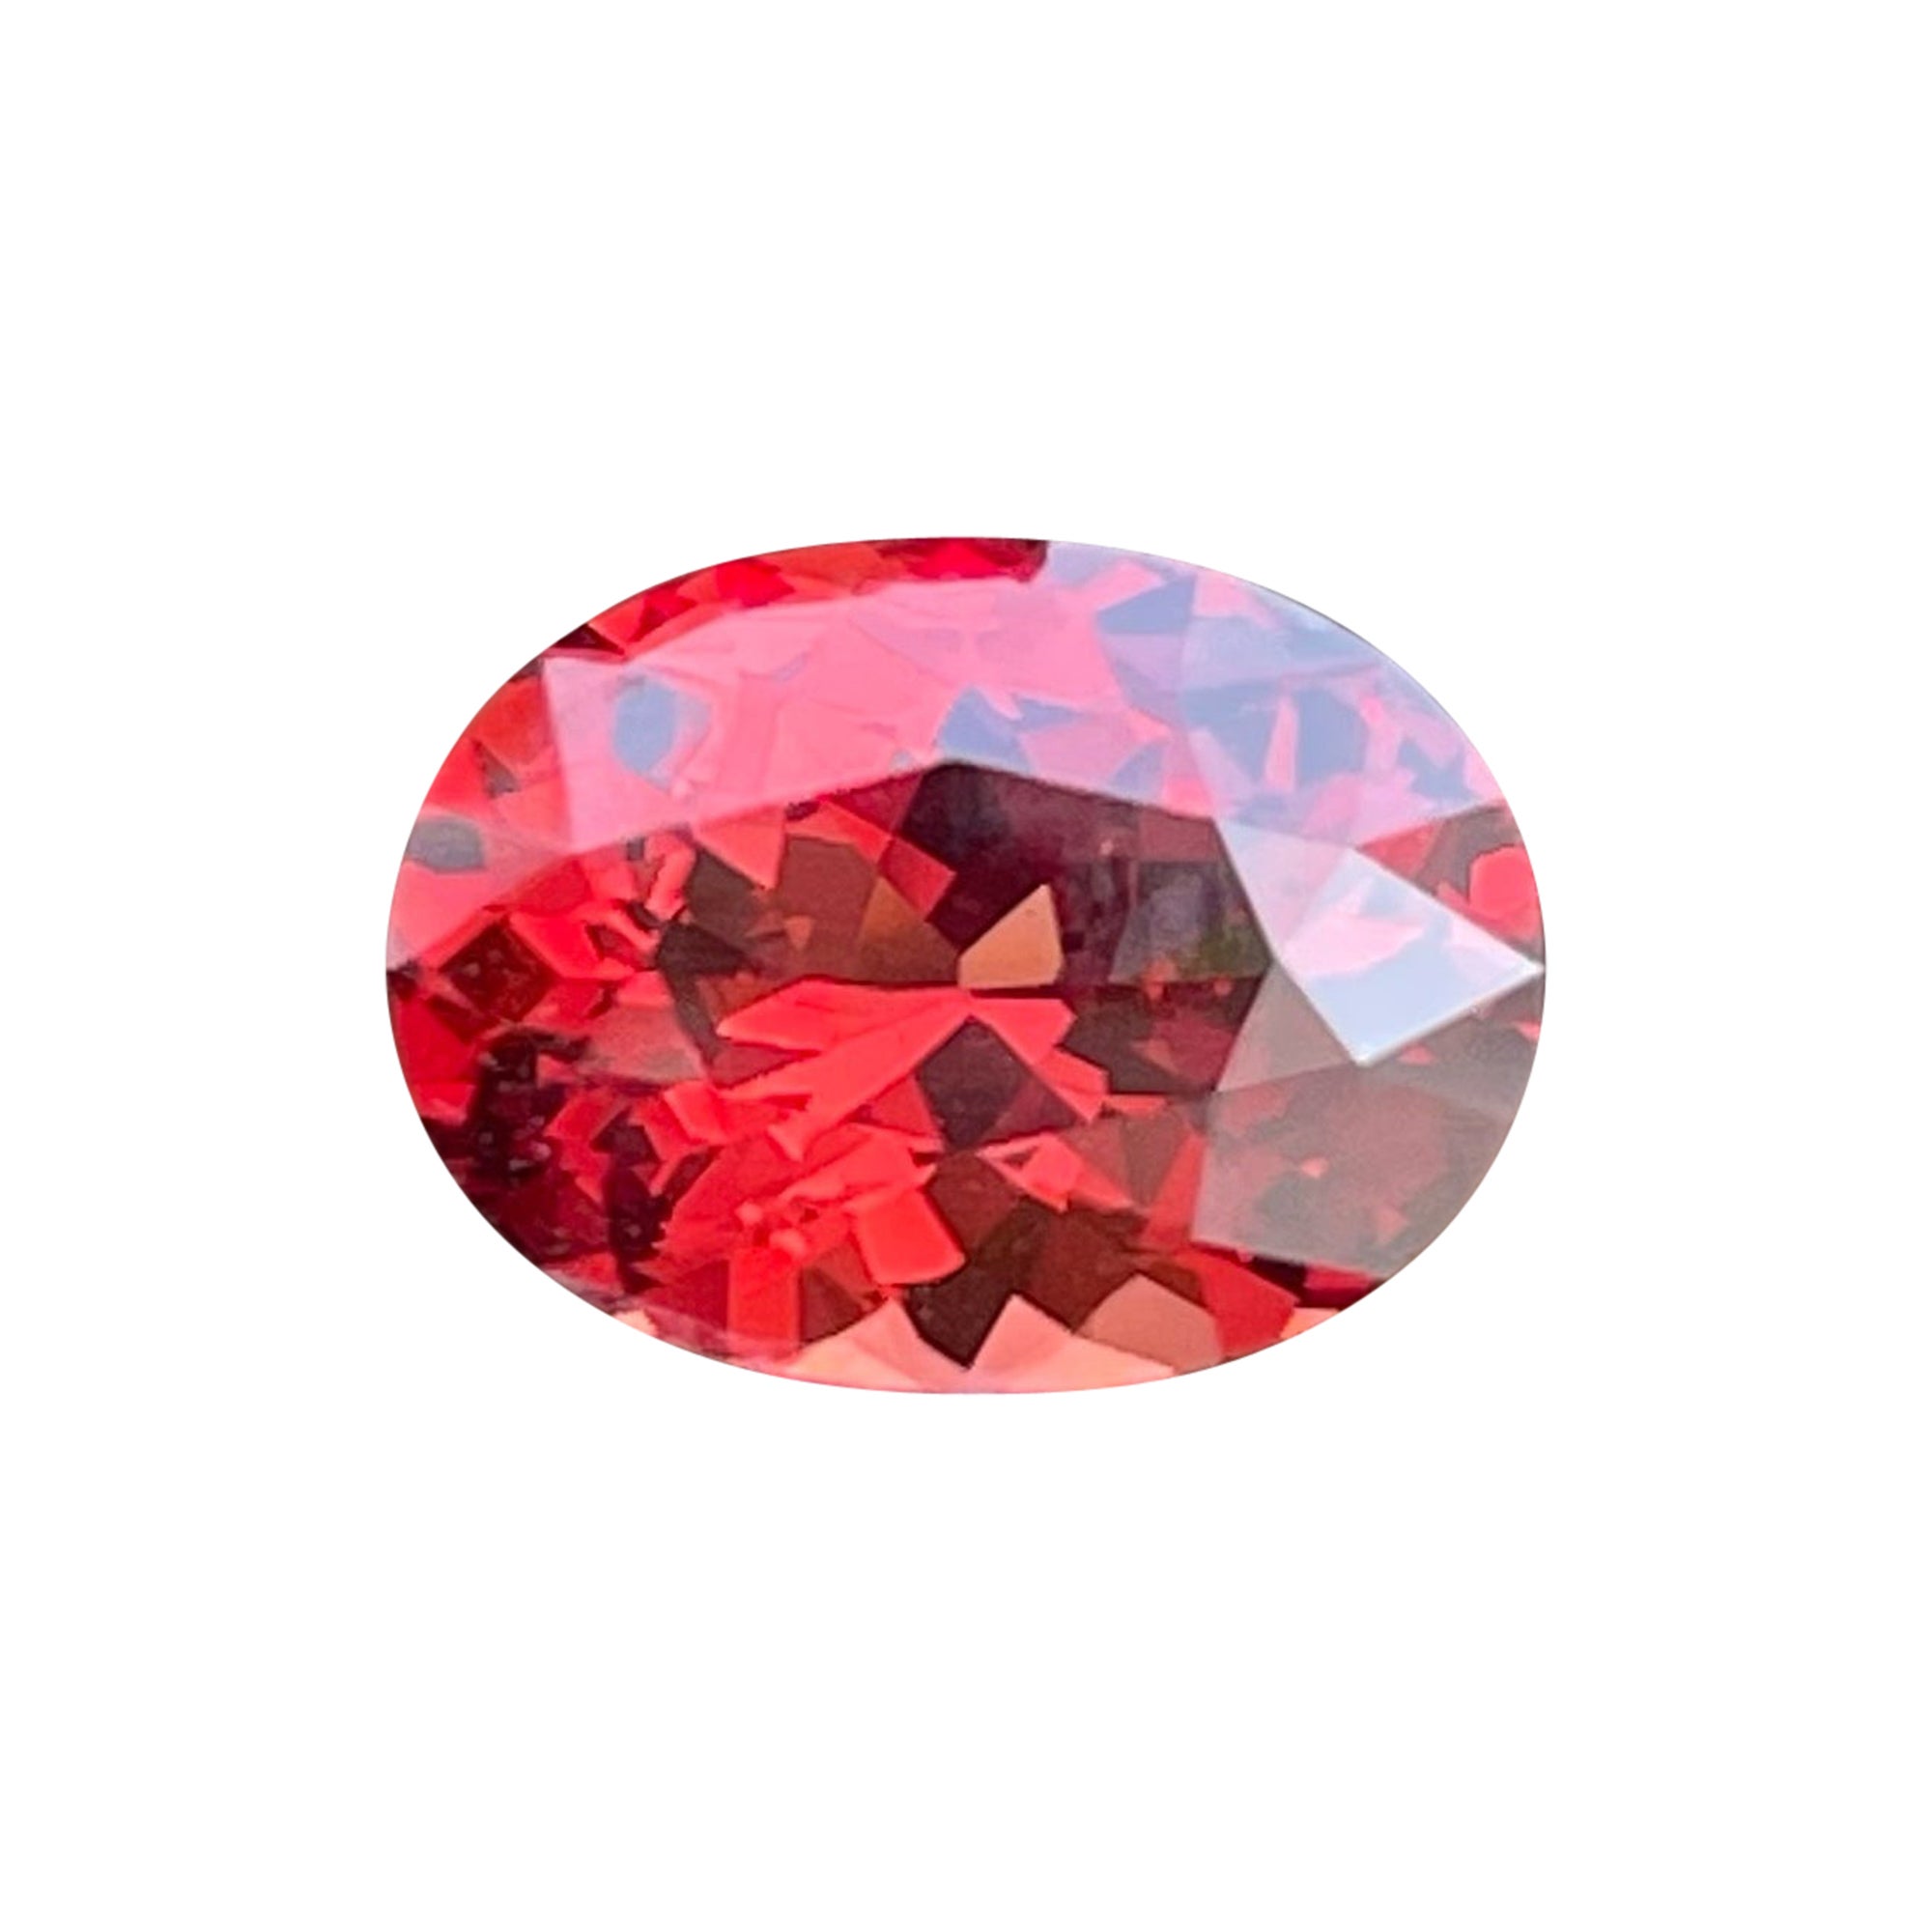 Beautiful Brownish Red Spinel Gemstone 1.85 Carats Spinel Gemstone for Jewelry For Sale